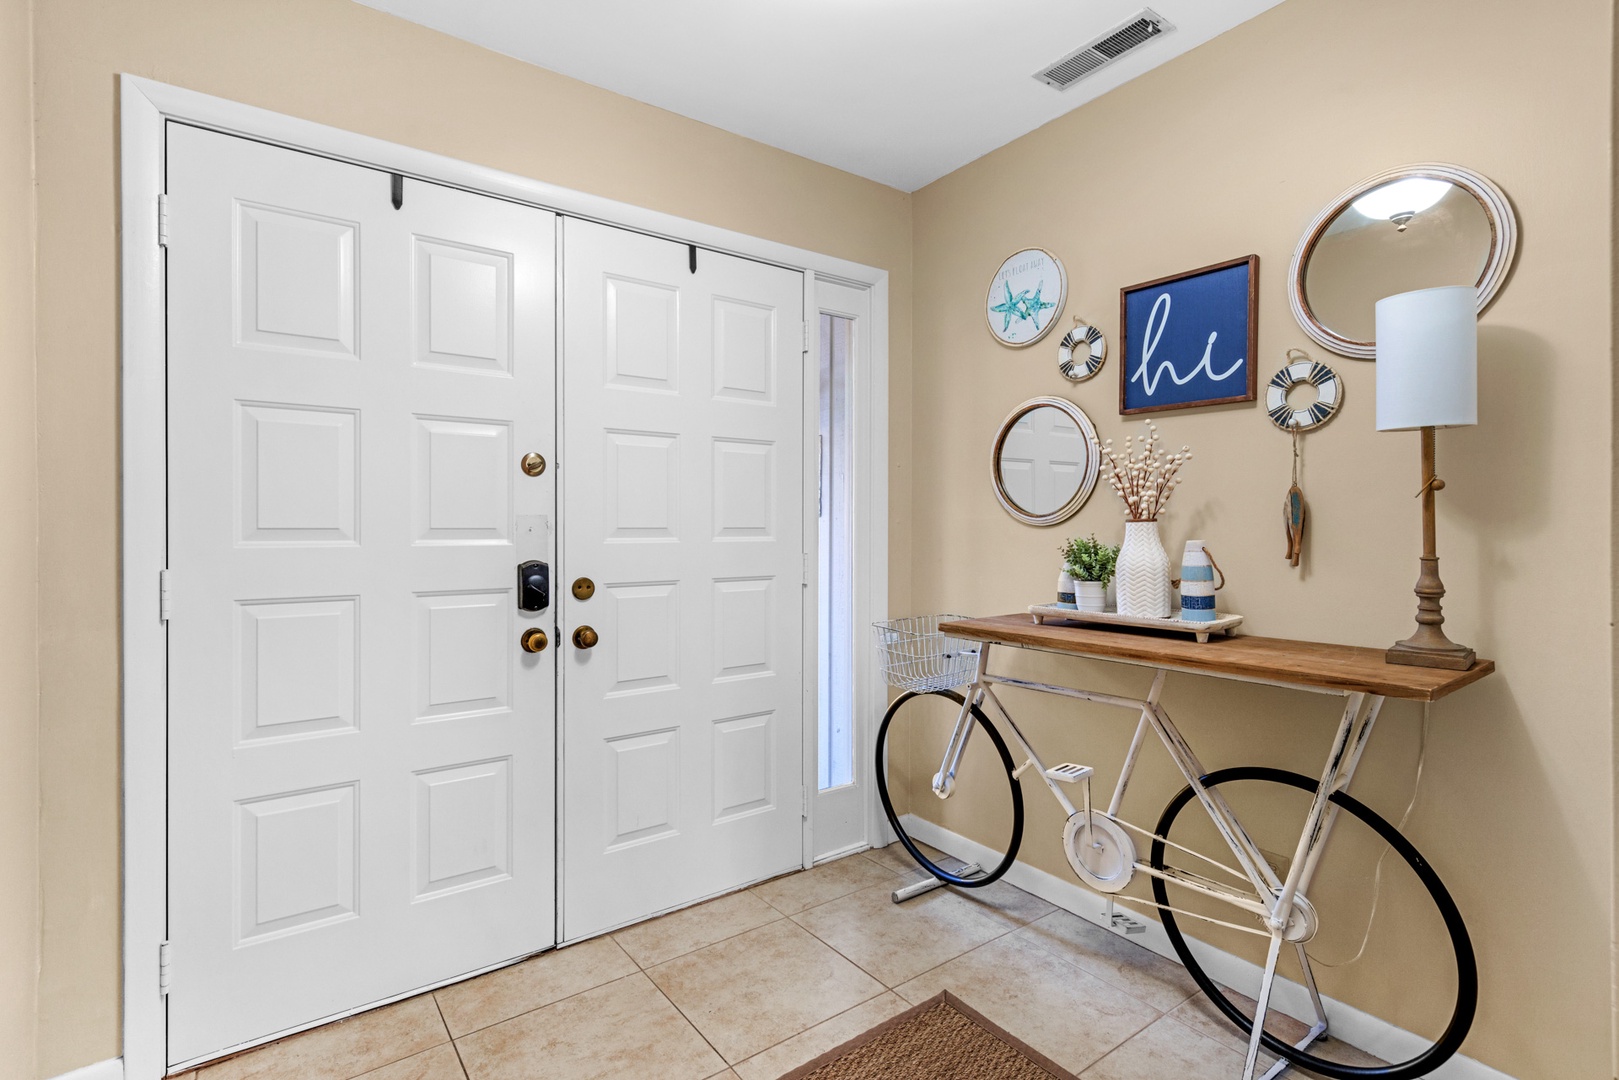 Step into the bright and welcoming entryway